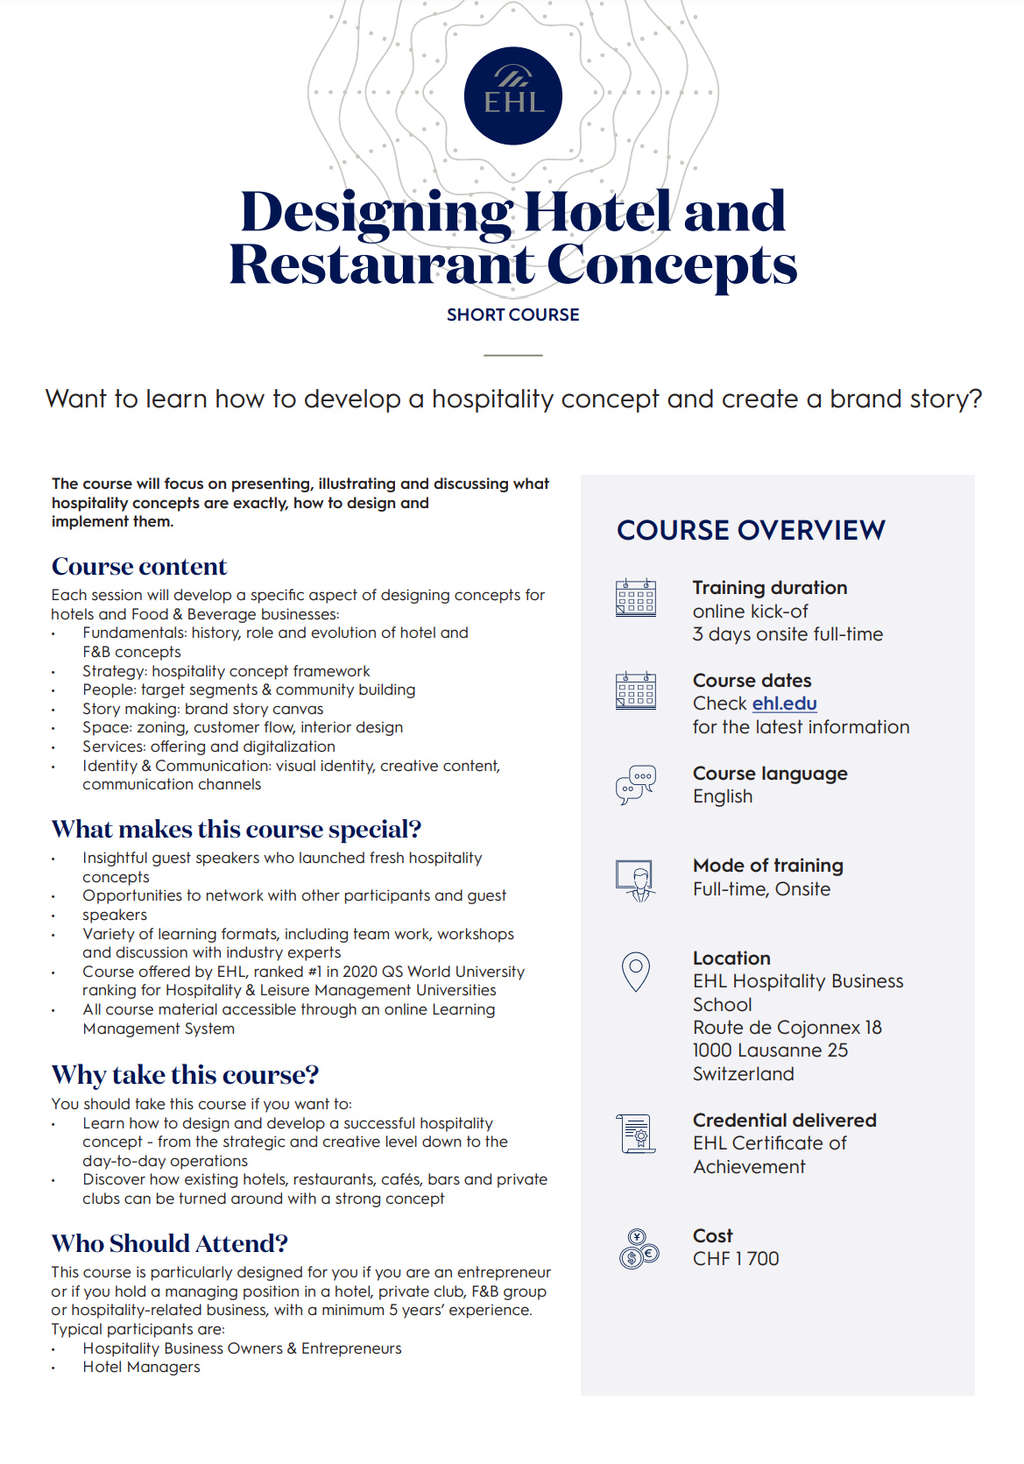 Short 3-Day Course at EHL Hospitality Business School: Designing Hotel and Restaurant Concepts— Photo by EHL